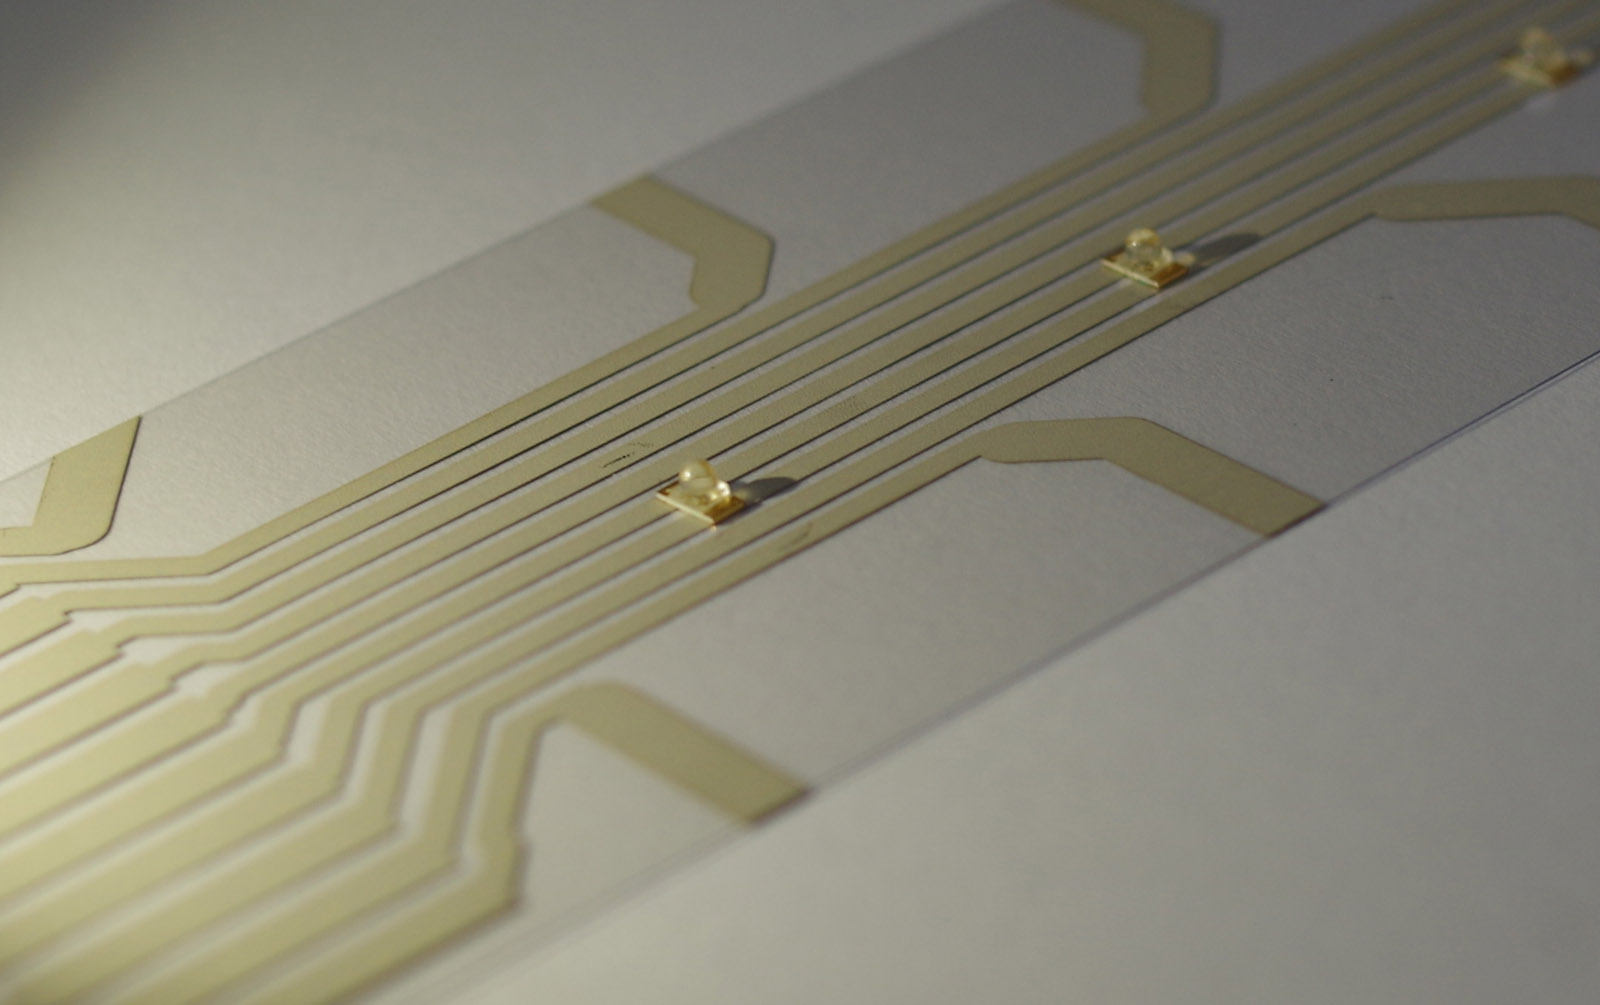 The Fraunhofer ENAS manufactures printed circuit boards in screen printing on a flexible plastic film. The tracks transmit electrical impulses – for example, to make LEDs glow.